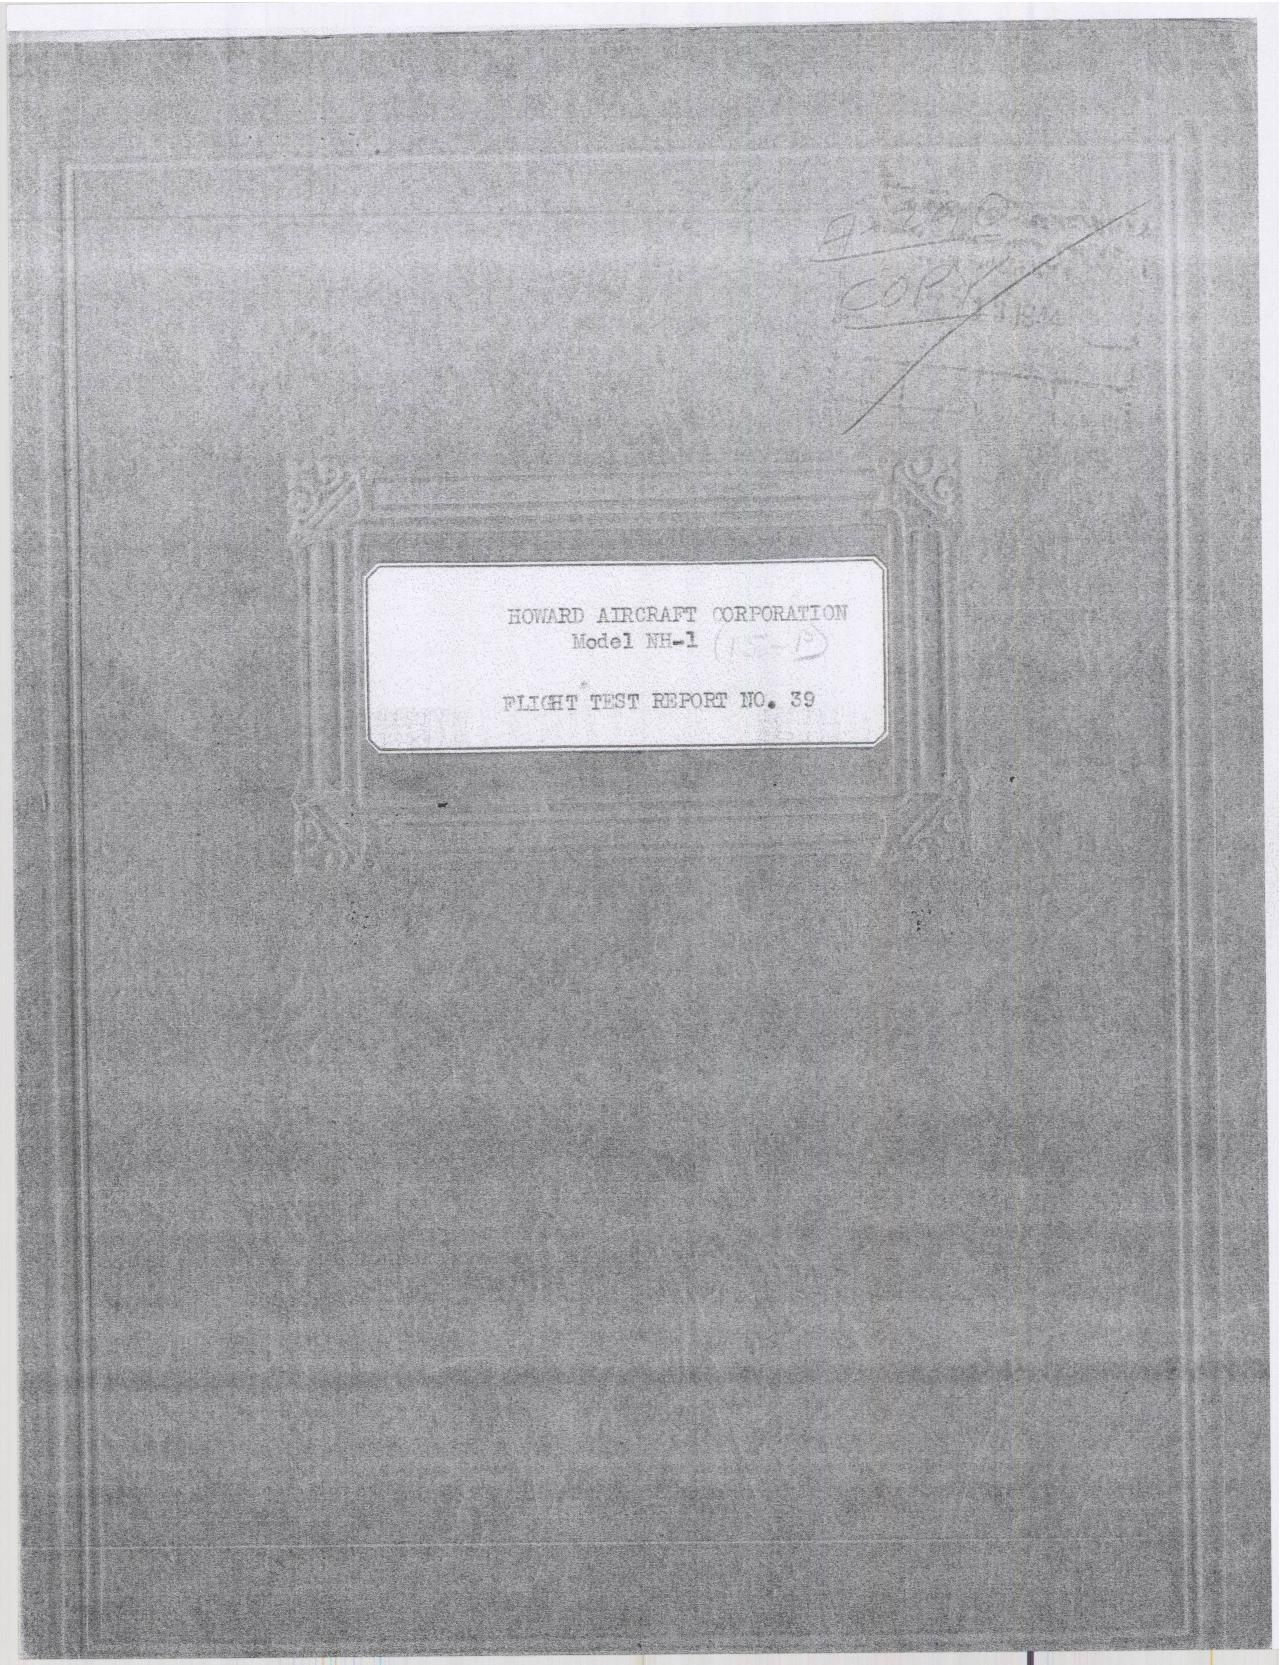 Sample page 1 from AirCorps Library document: Report 39, Flight Test Report, NH-1